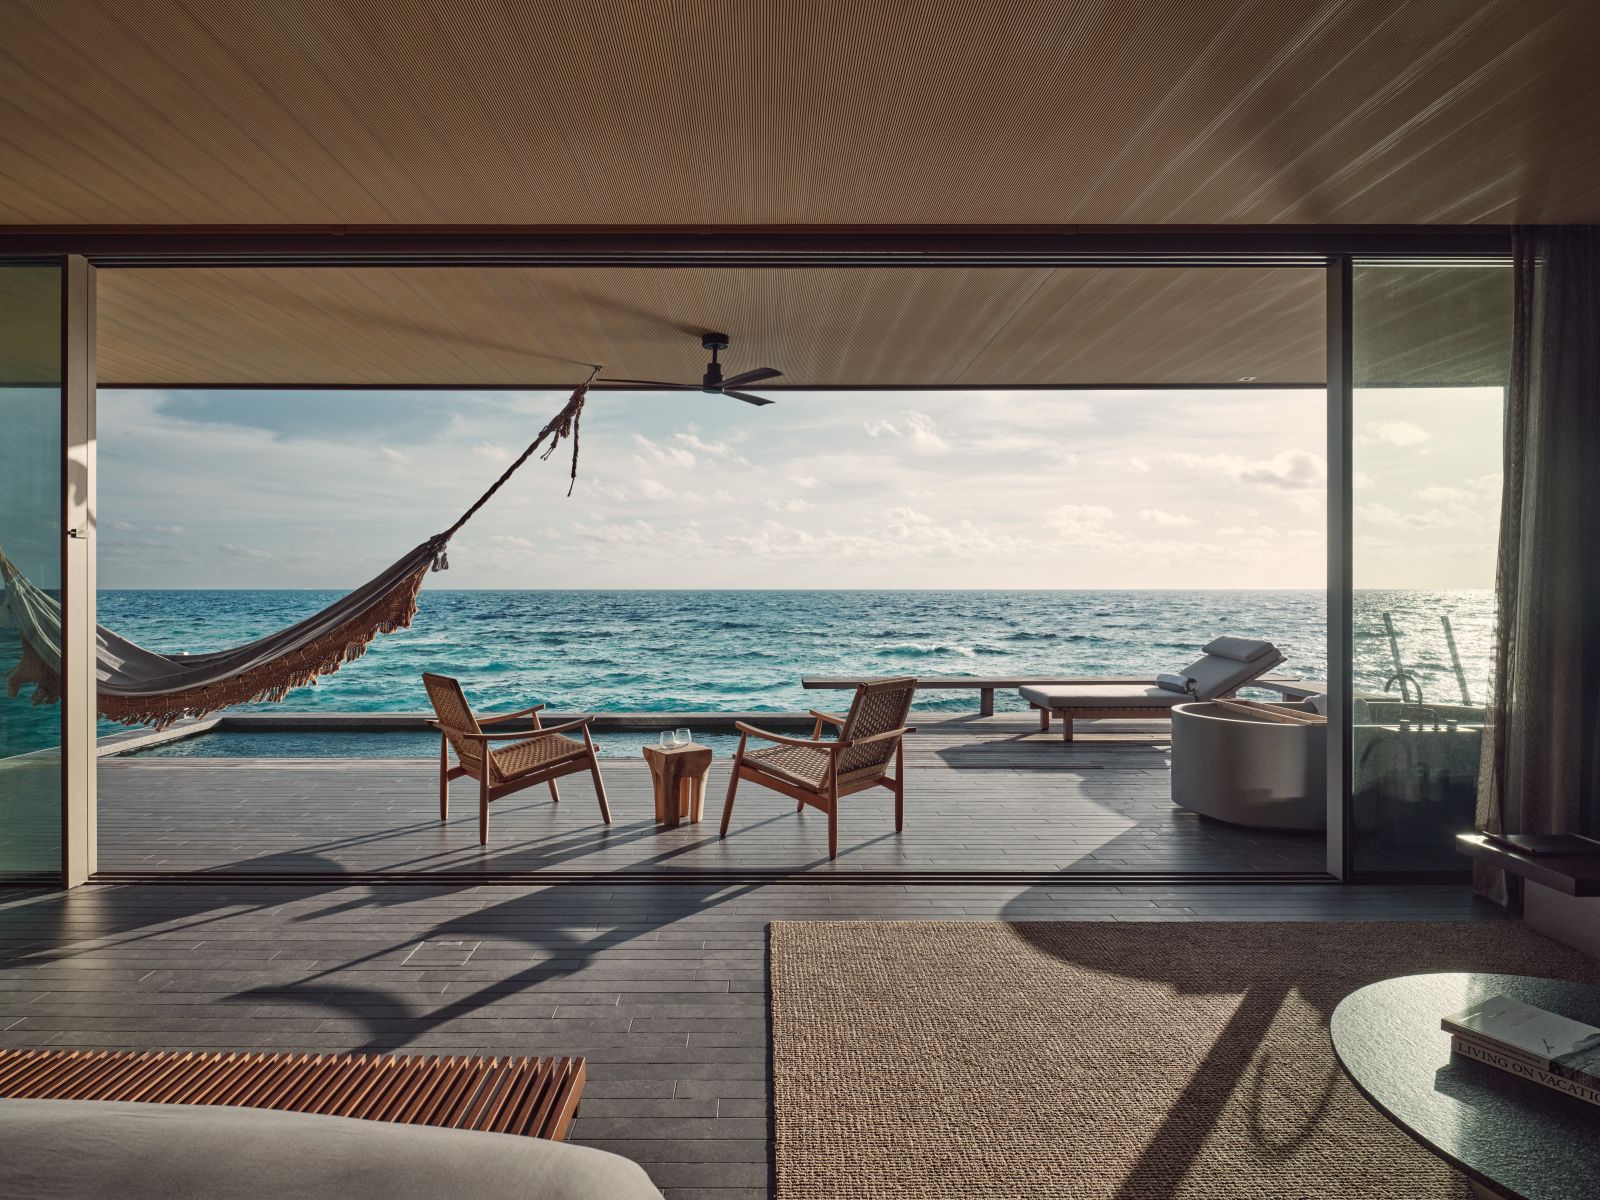 View over the deck with loungers, hammock and chairs, and pool of a water villa at luxury resort Patina in the Maldives